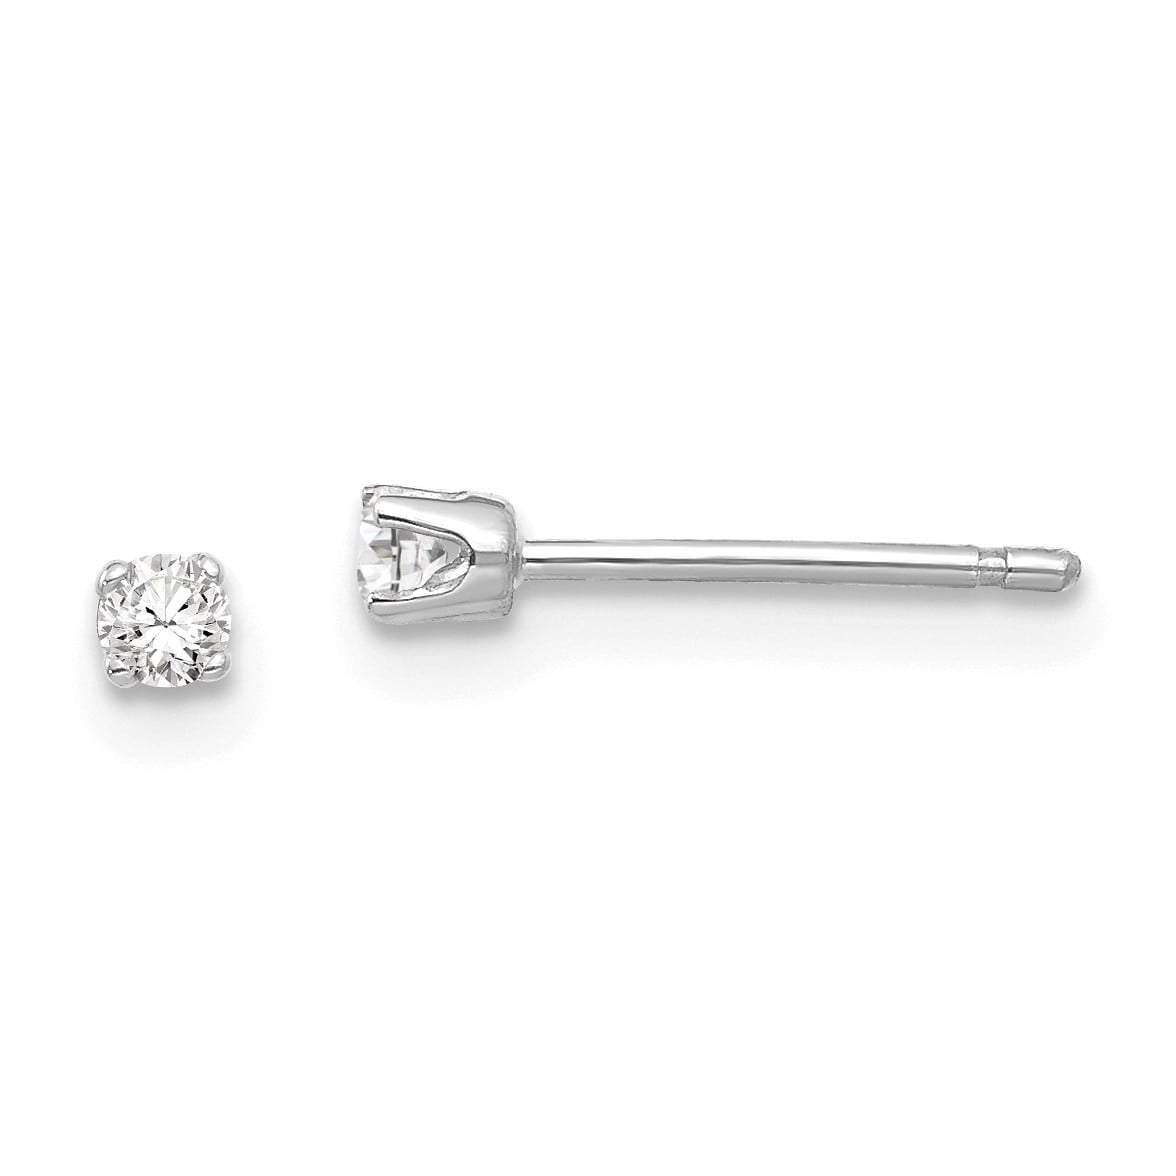 Details about   14K White Gold 2.25 MM Round CZ Stud Earrings MSRP $142